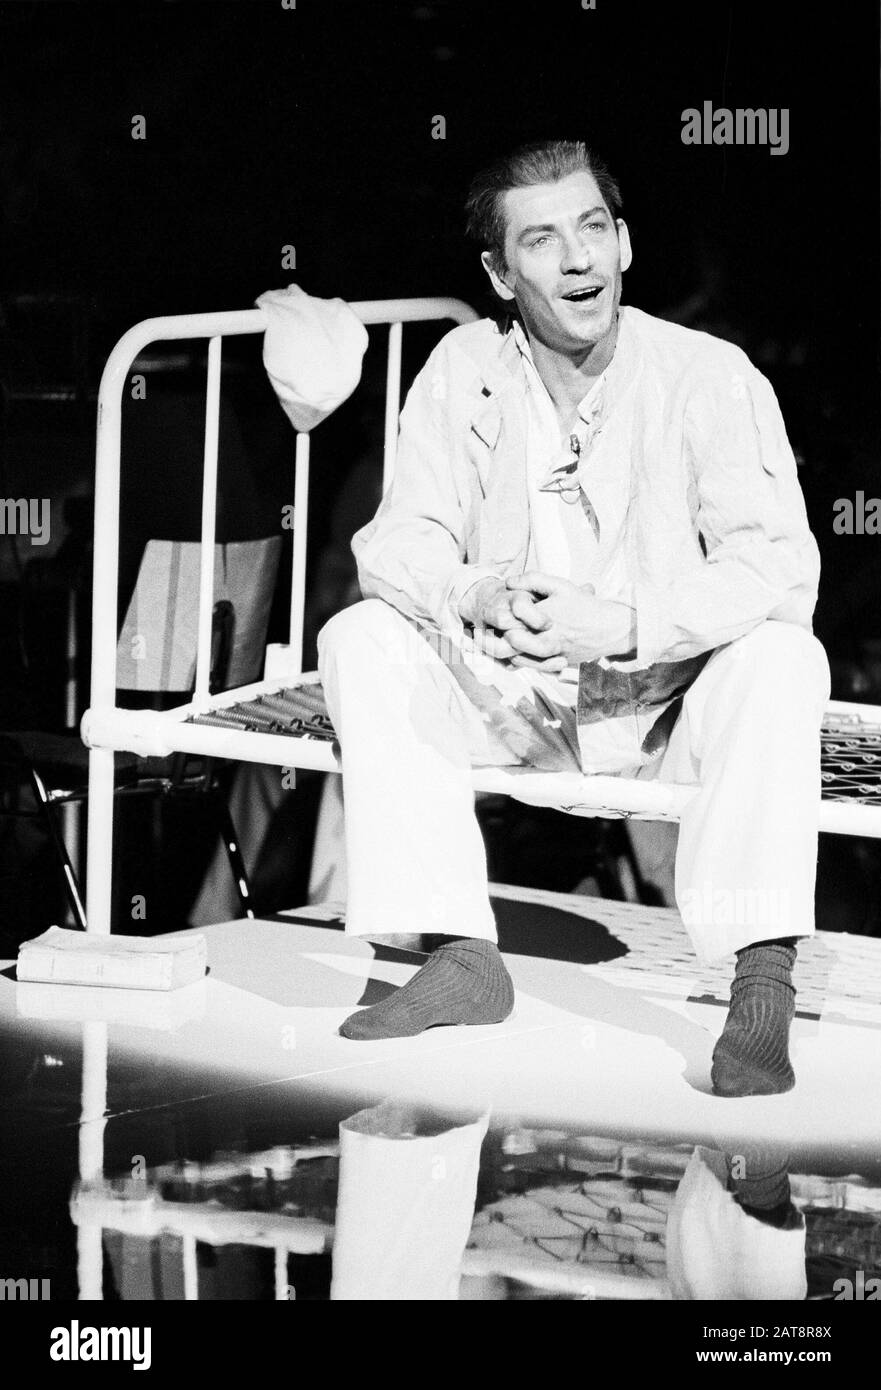 Ian McKellen (Alexander) in EVERY GOOD BOY DESERVES FAVOUR by Tom Stoppard and Andre Previn directed by Trevor Nunn for Royal Shakespeare Company (RSC) at the Royal Festival Hall, London in 1977 as part of Queen Elizabeth's Silver Jubilee. Sir Ian Murray McKellen, born 1939, Burnley, England. English stage and film actor. Co-founder of Stonewall, gay rights activist, knighted in 1990, made a Companion of Honour 2007. Stock Photo